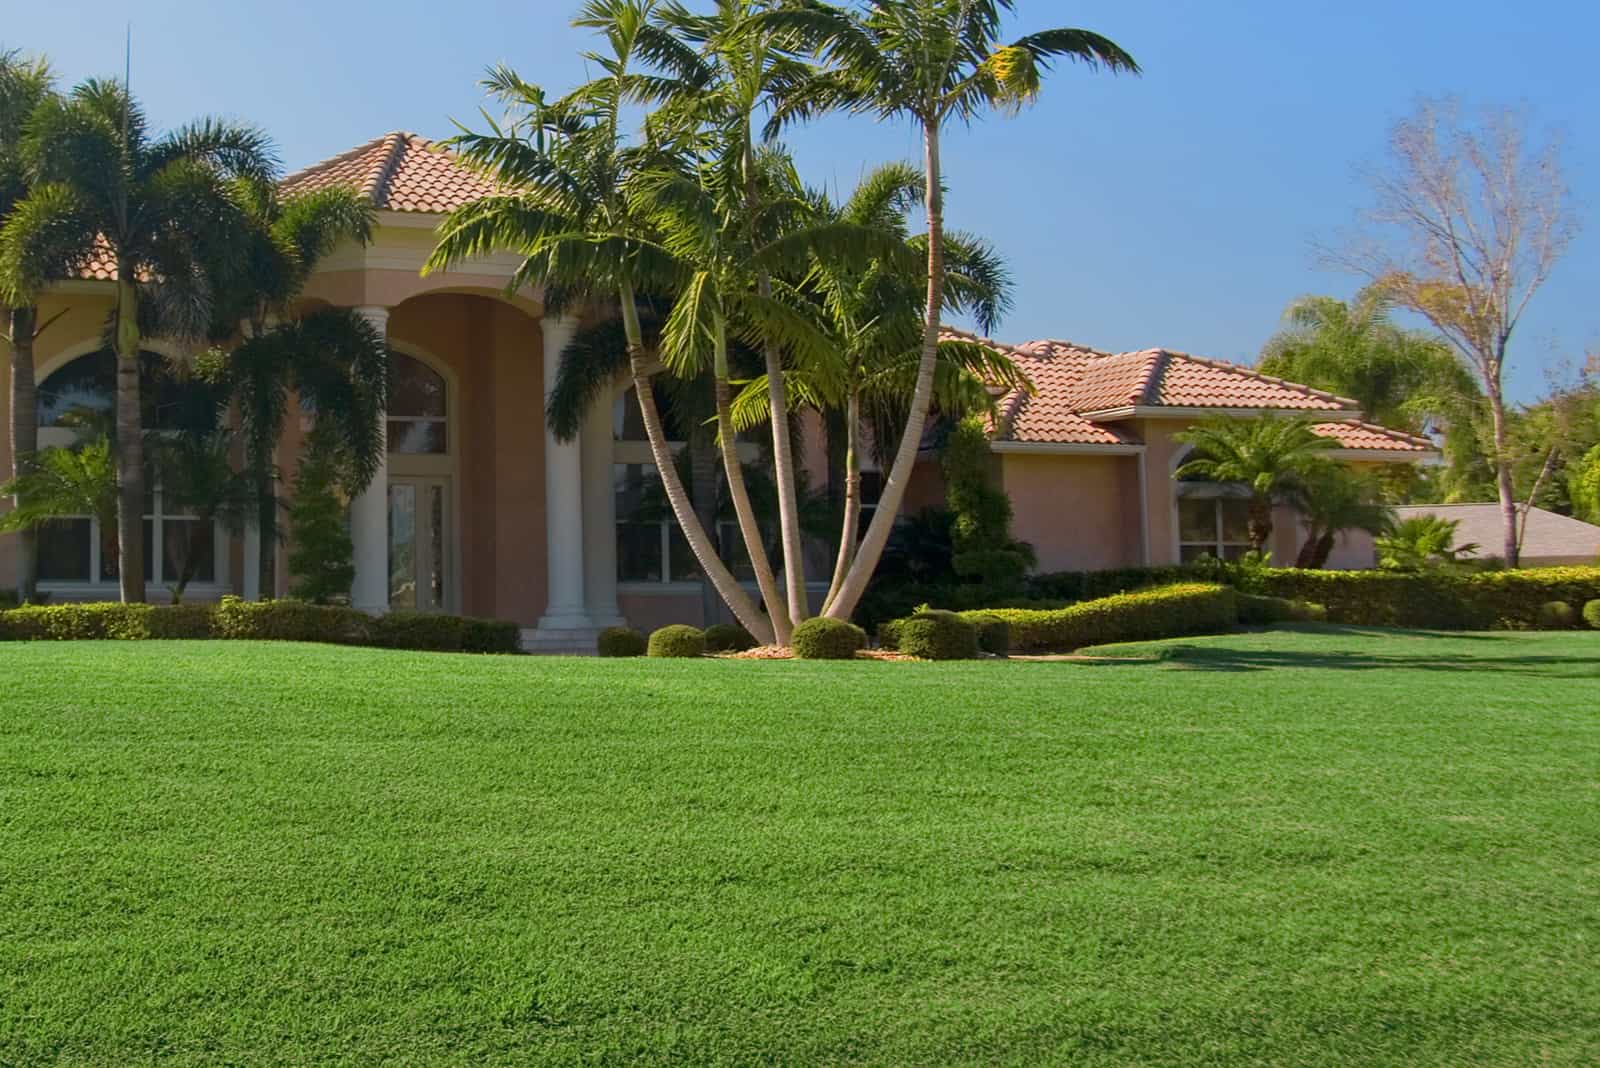 Grass Types In Florida: 7 Top Picks For Your Florida Lawn